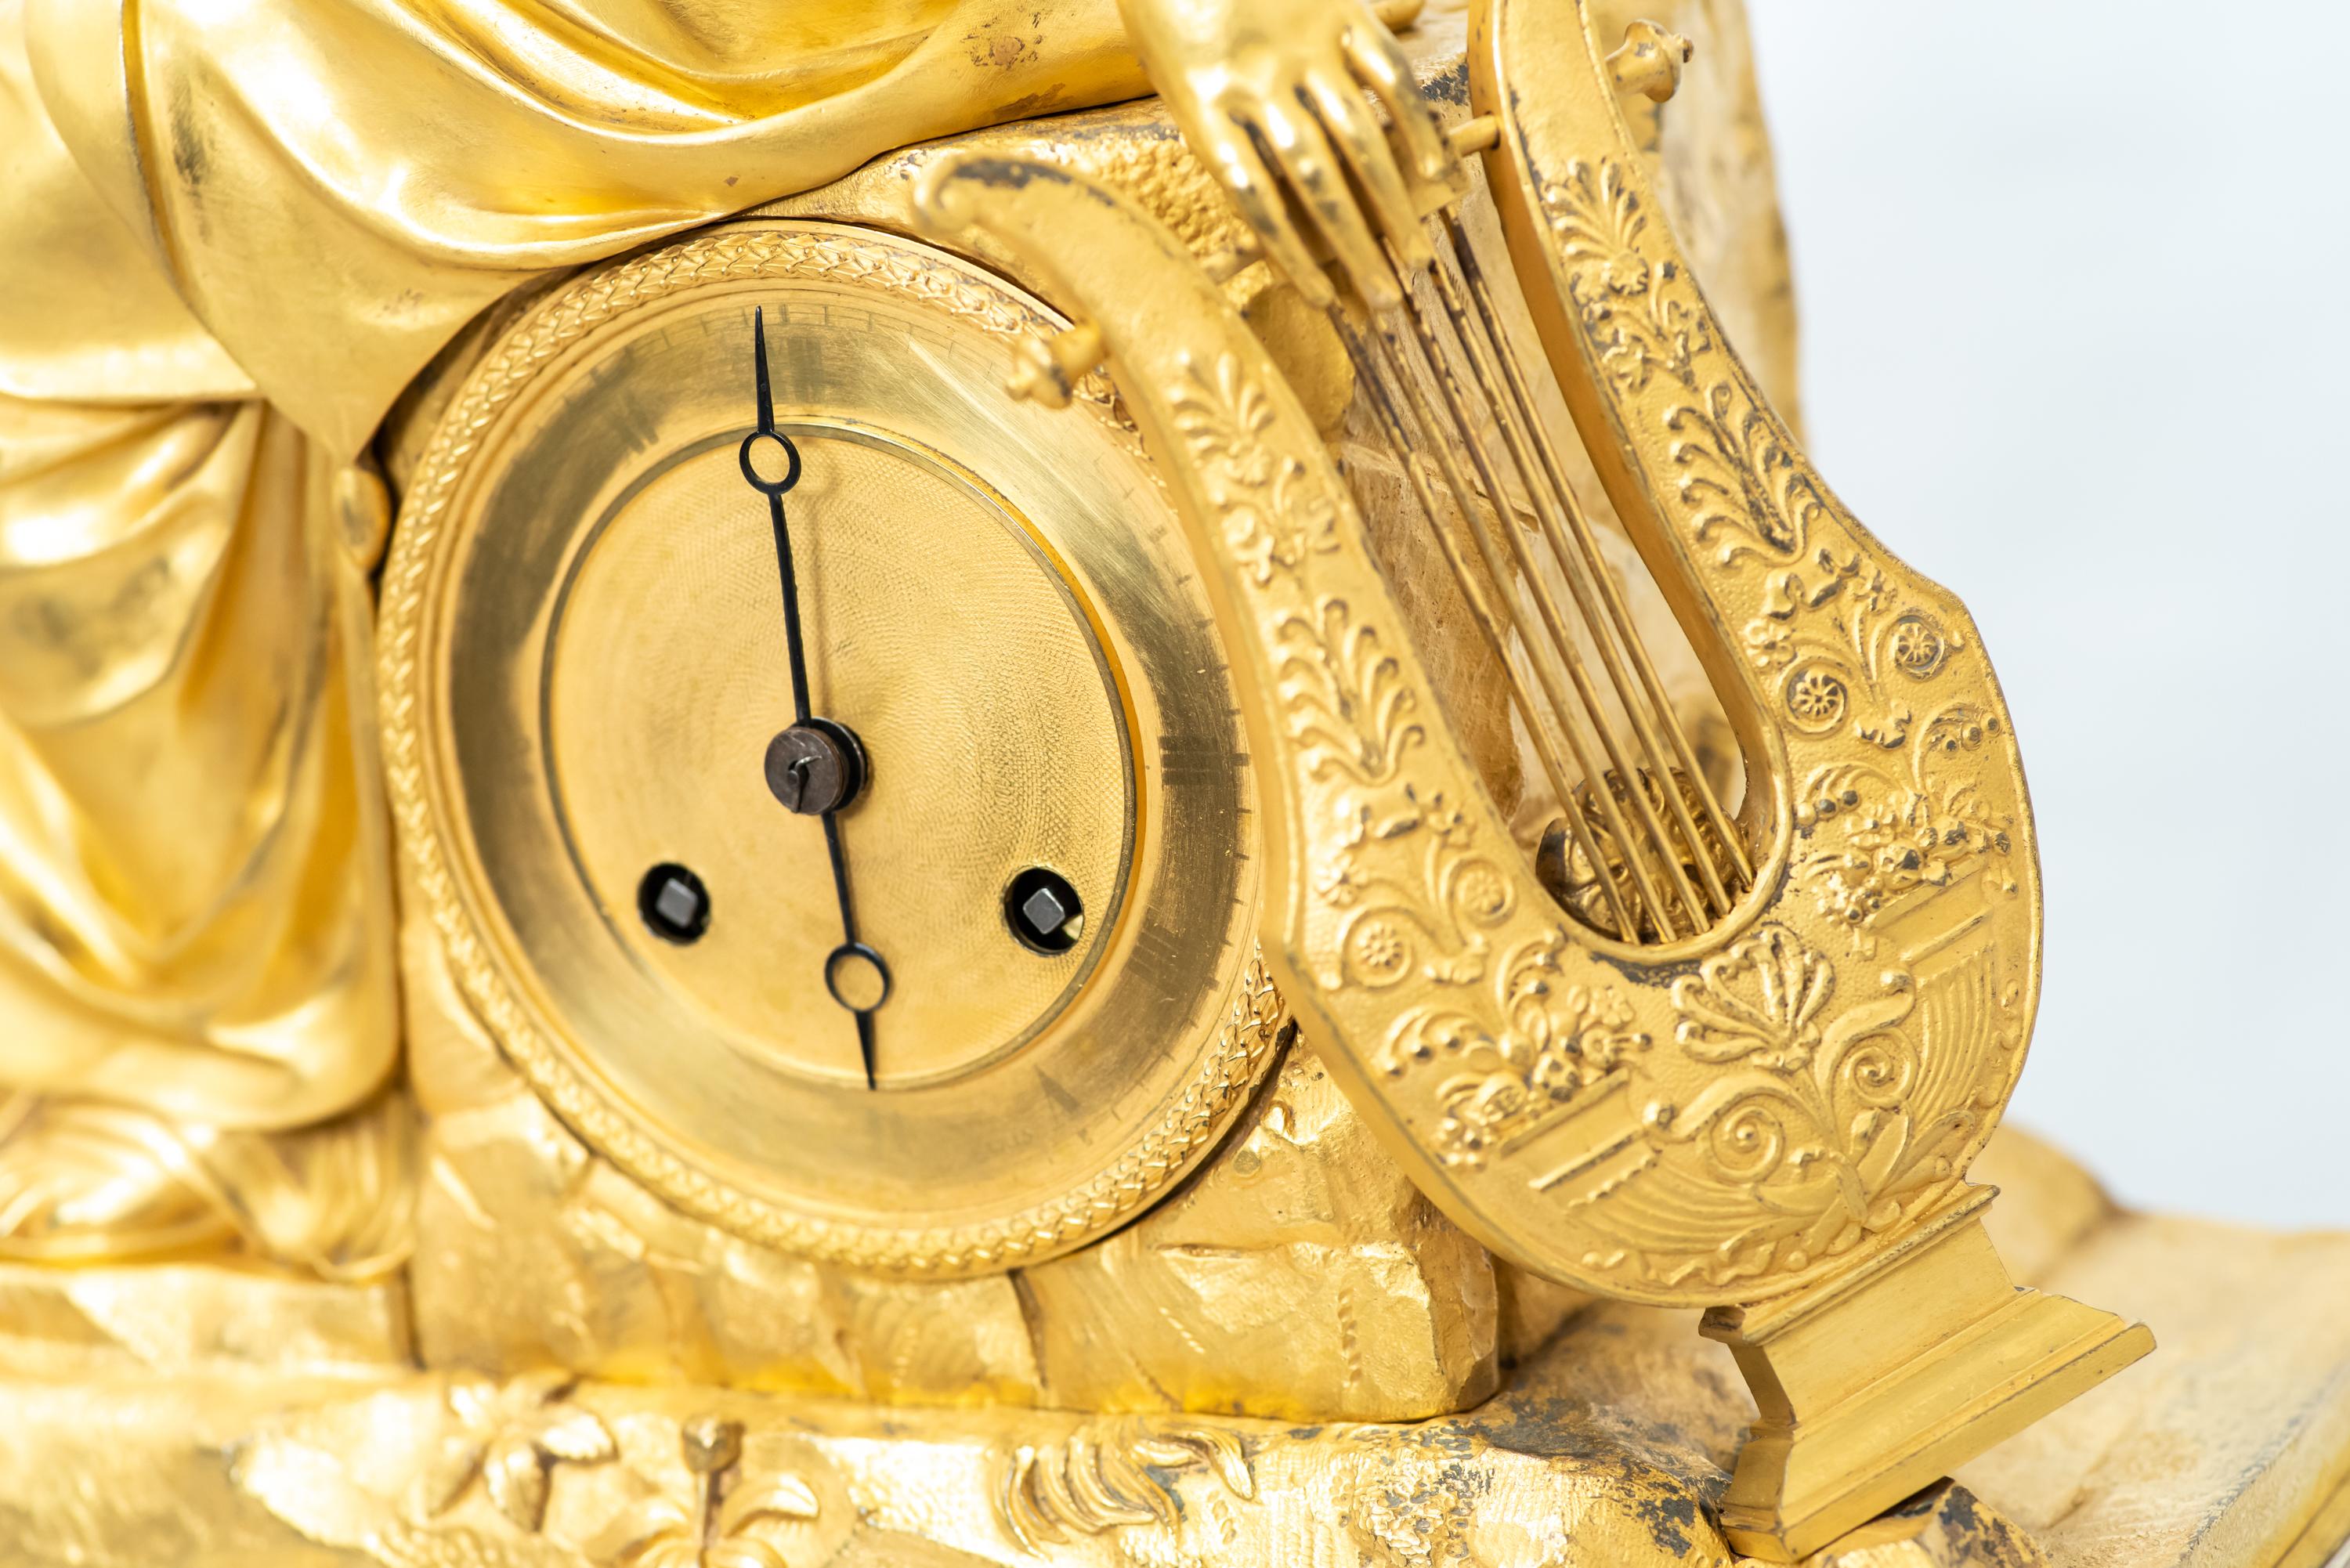 Early 19th Century Madame de Staël Fire-Gilt Bronze Clock  In Good Condition For Sale In 263-0031, JP